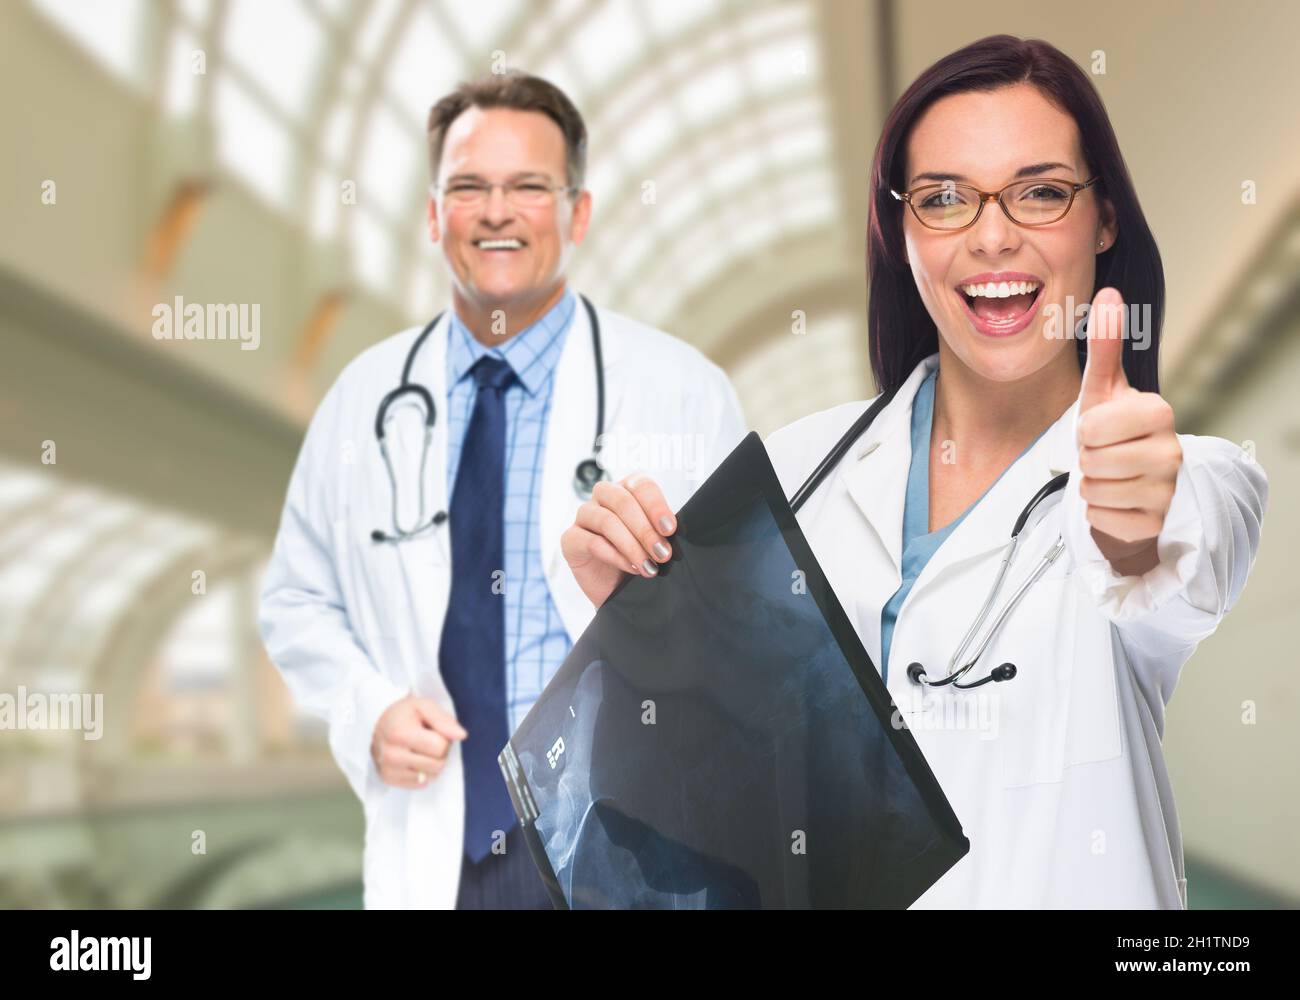 Doctors or Nurses With Thumbs Up Holding X-ray Standing Inside Hospital. Stock Photo